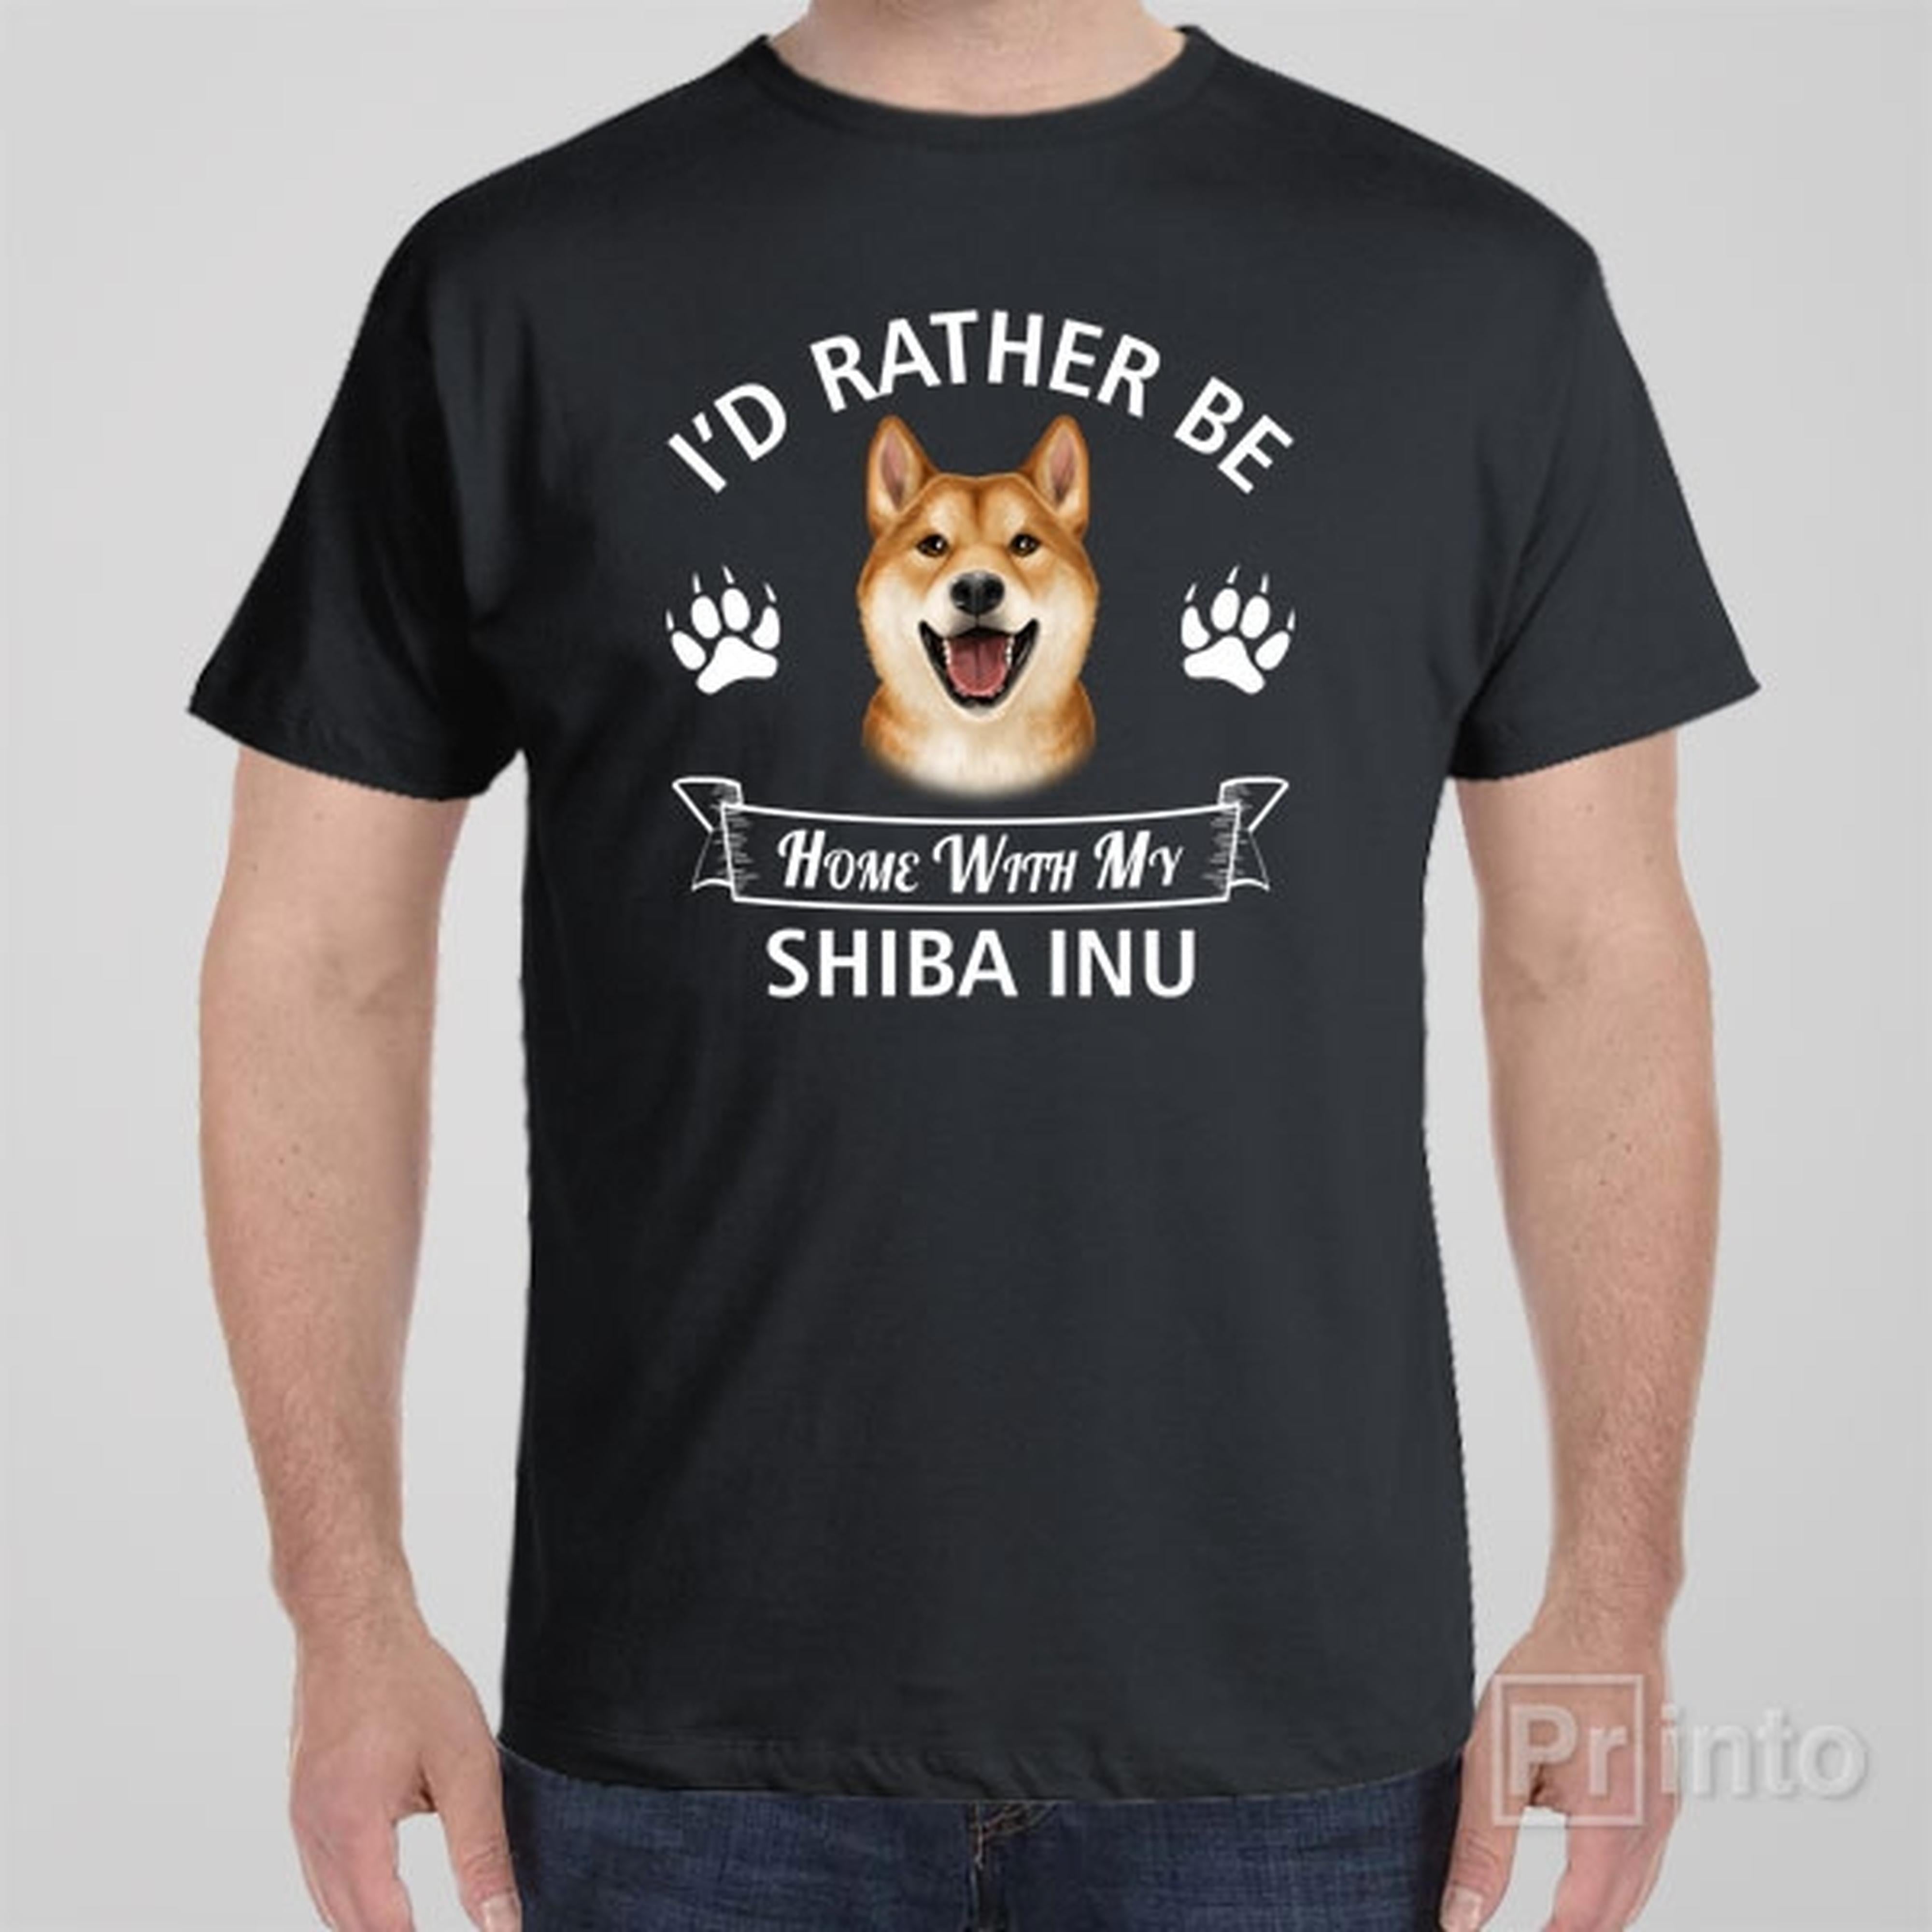 id-rather-stay-home-with-my-shiba-inu-t-shirt